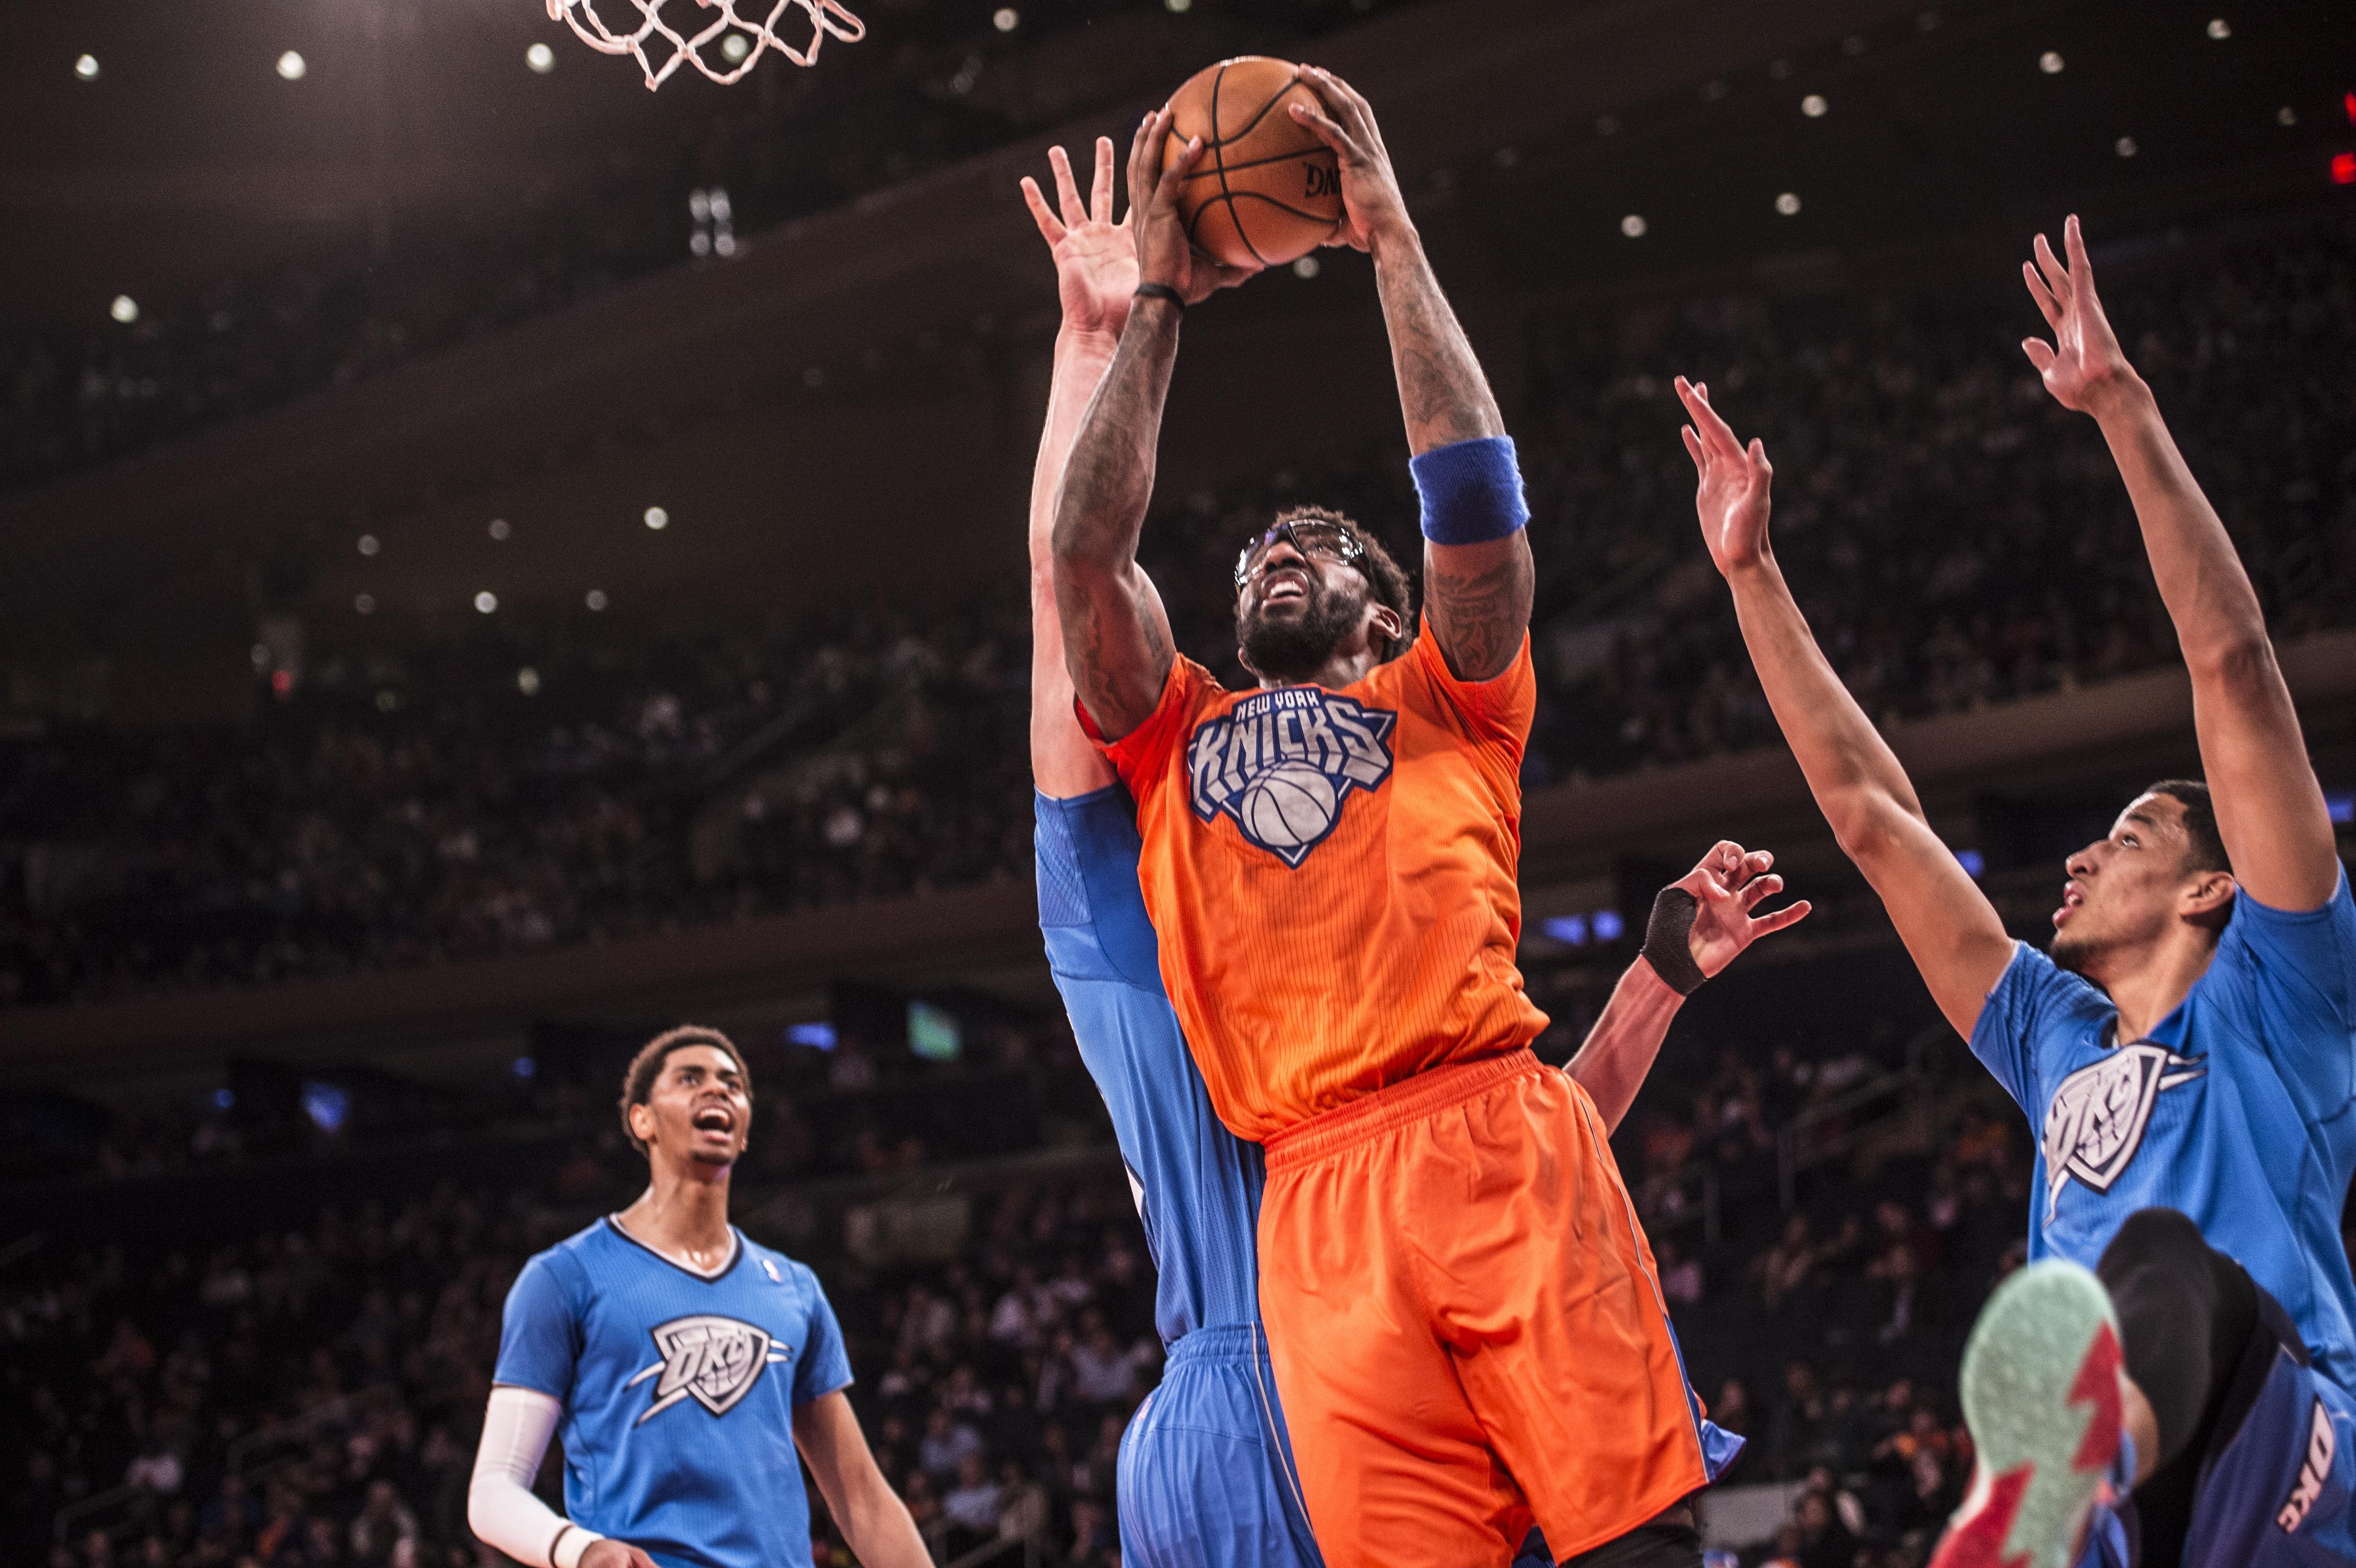 Amar'e Stoudemire Eyes Tech Investing As Career Spans NBA, Israel